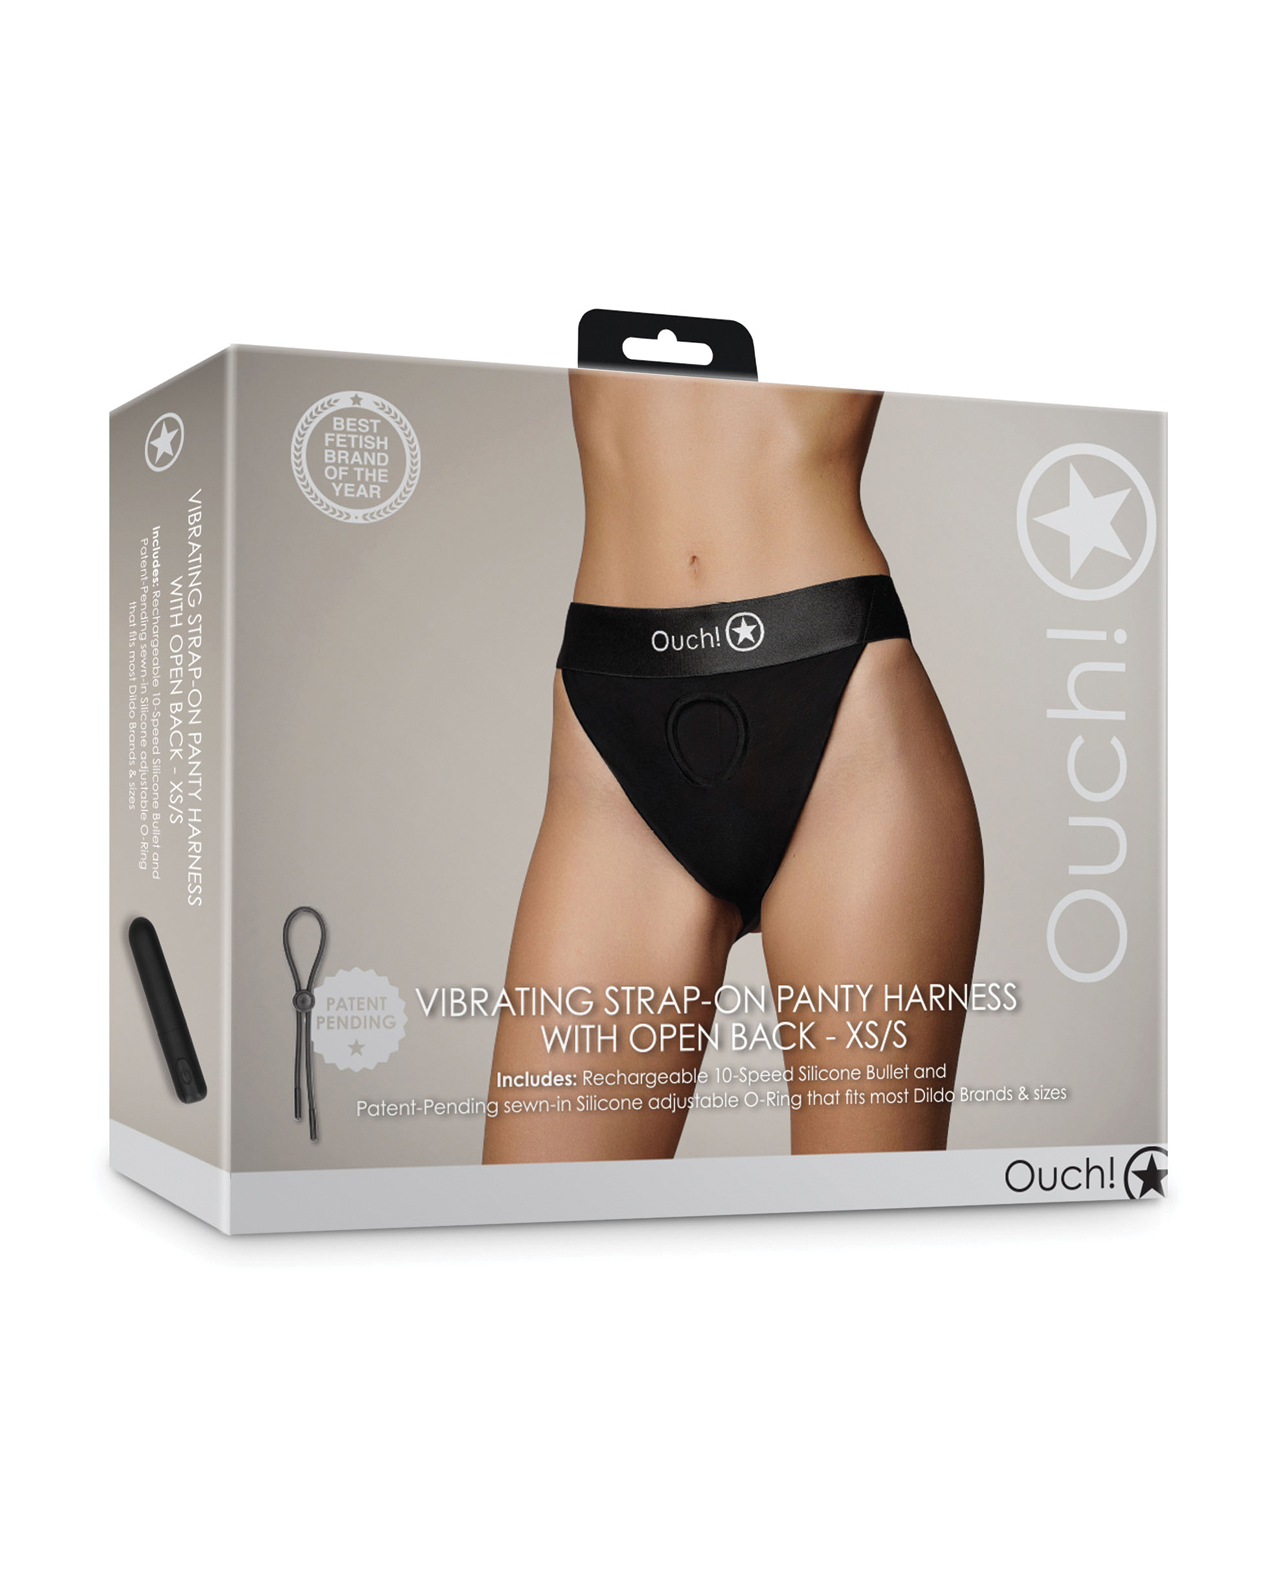 The picture on the packaging is a woman's torso wearing the vibrating panty harness